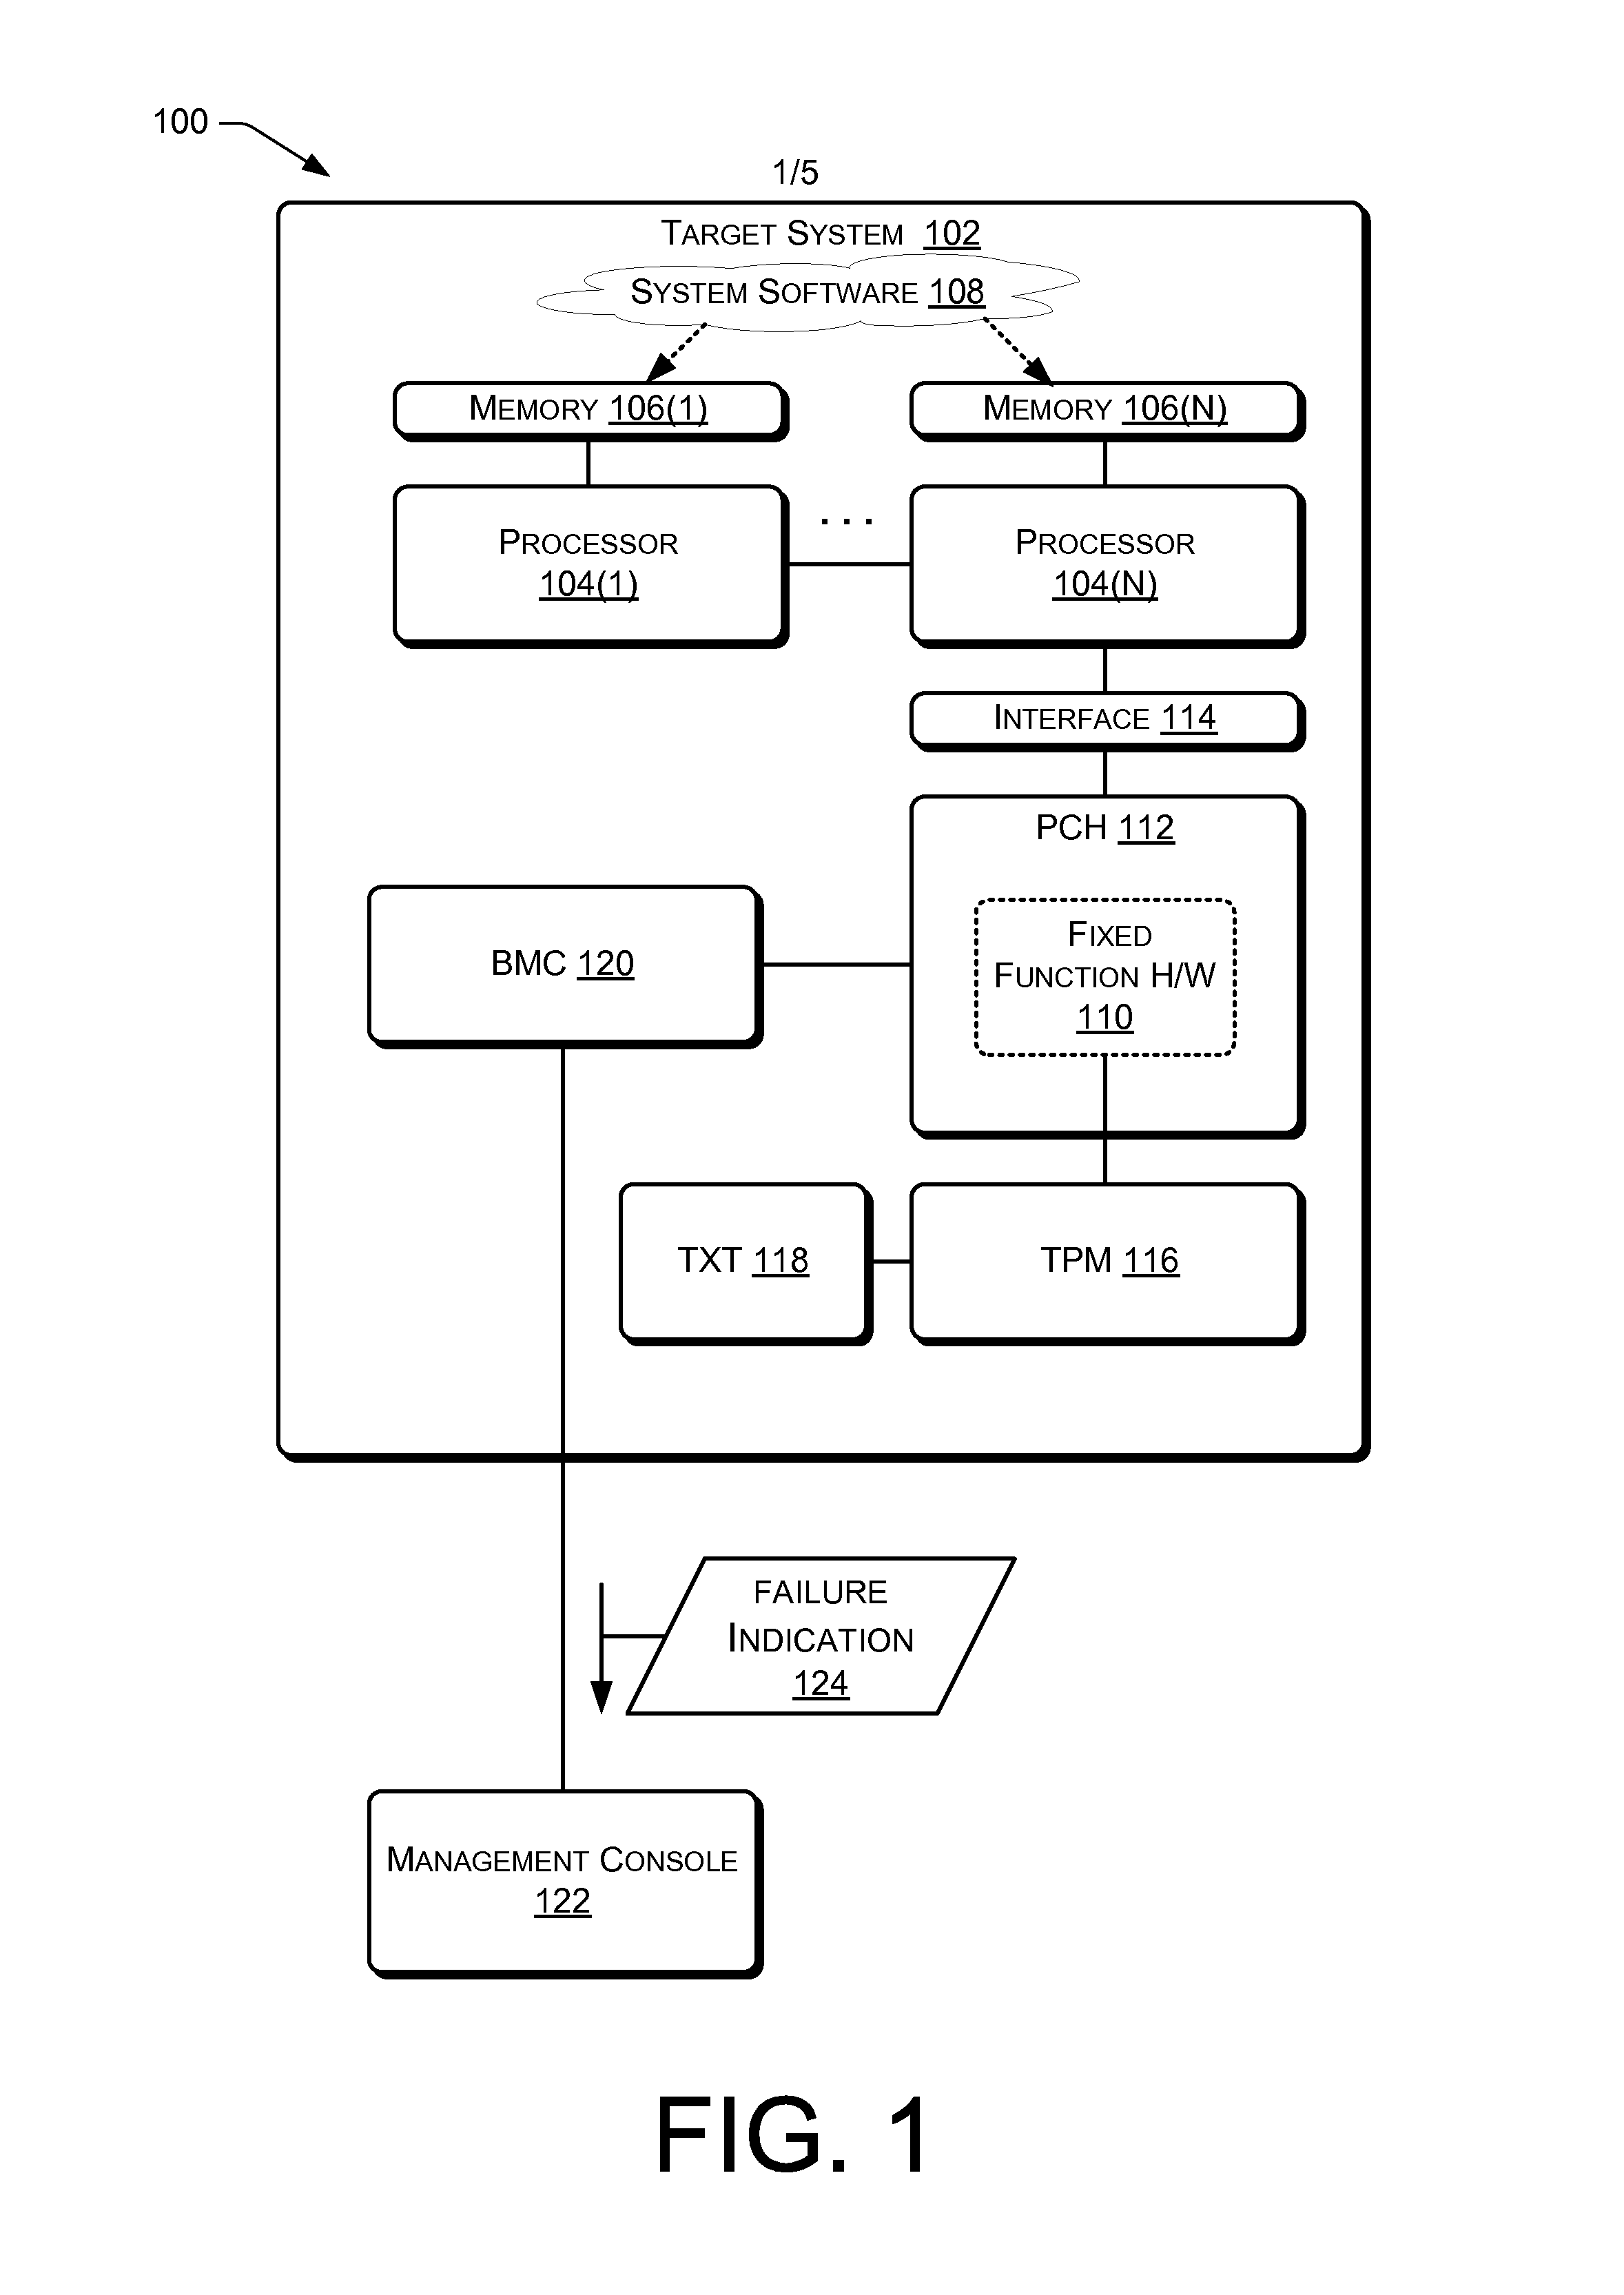 Apparatus for hardware accelerated runtime integrity measurement